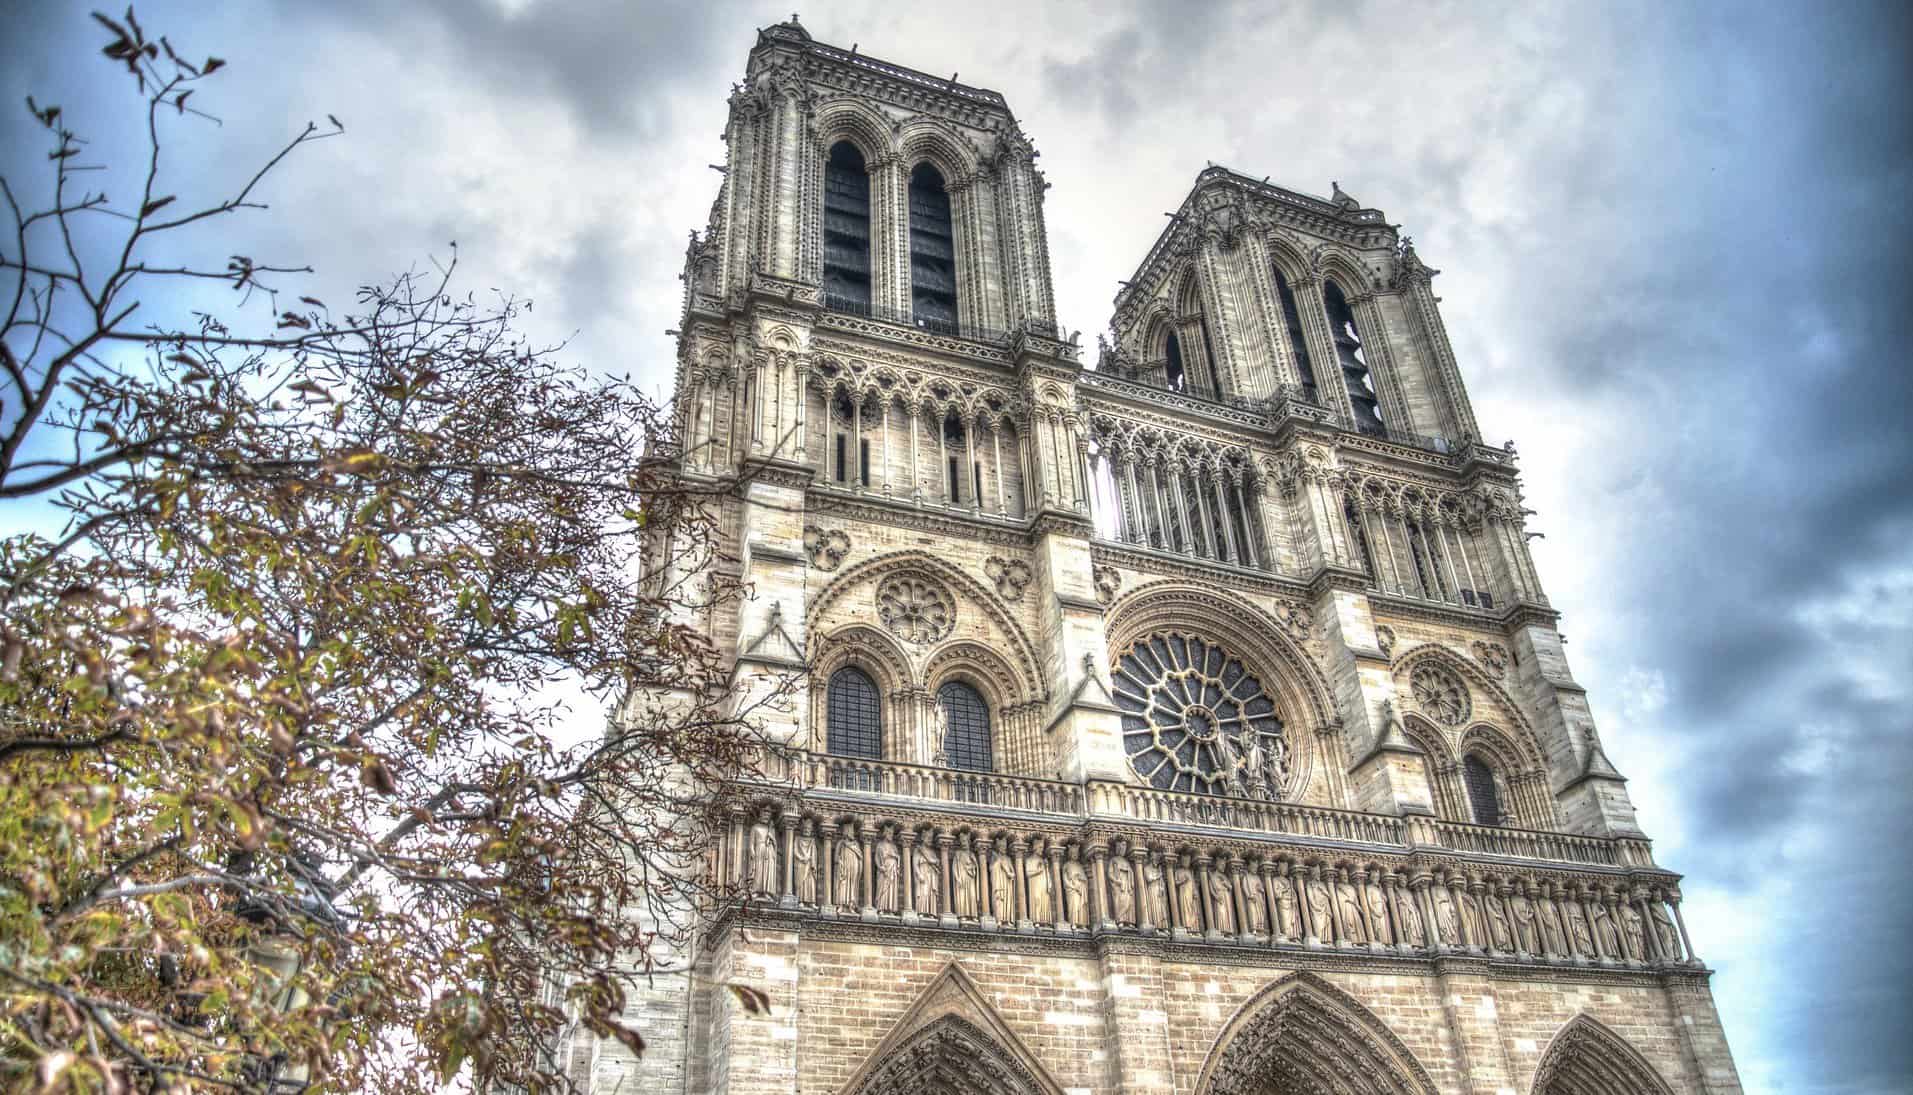 Towers of Notre Dame are seen from below at street level.